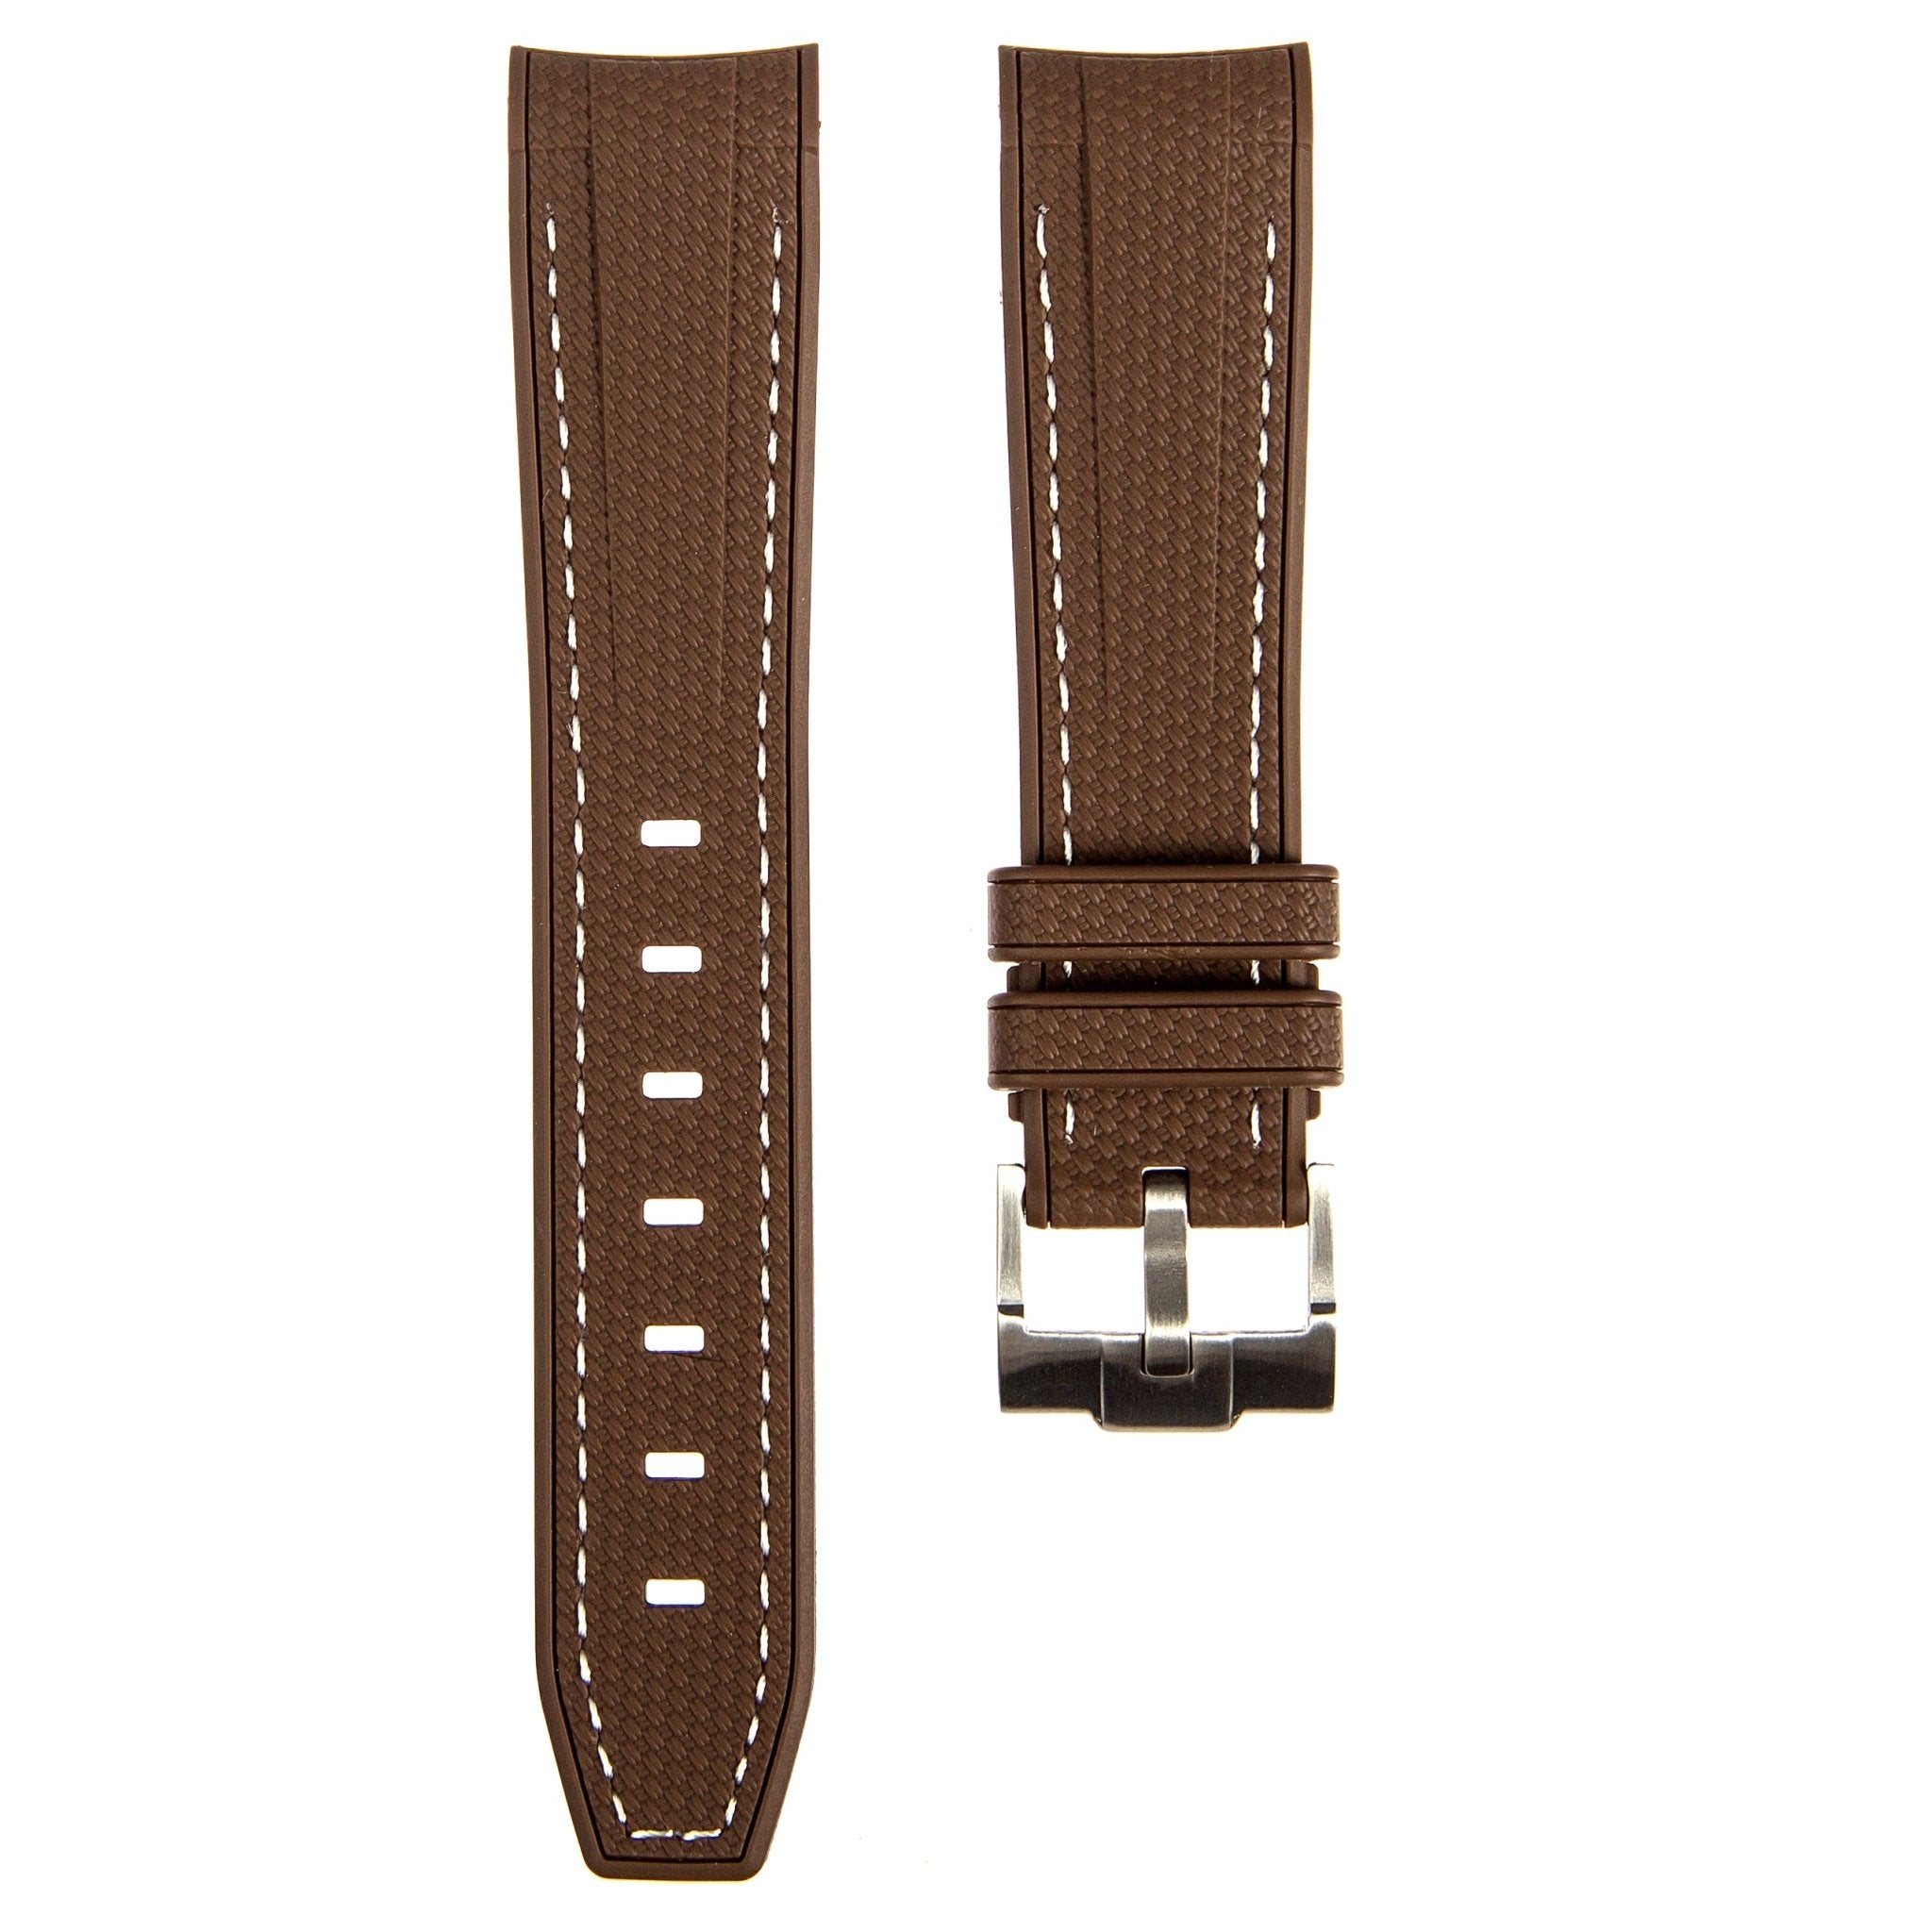 Textured Curved End Premium Silicone Strap - Compatible with Omega x Swatch - Brown with White Stitch (2405) -StrapSeeker